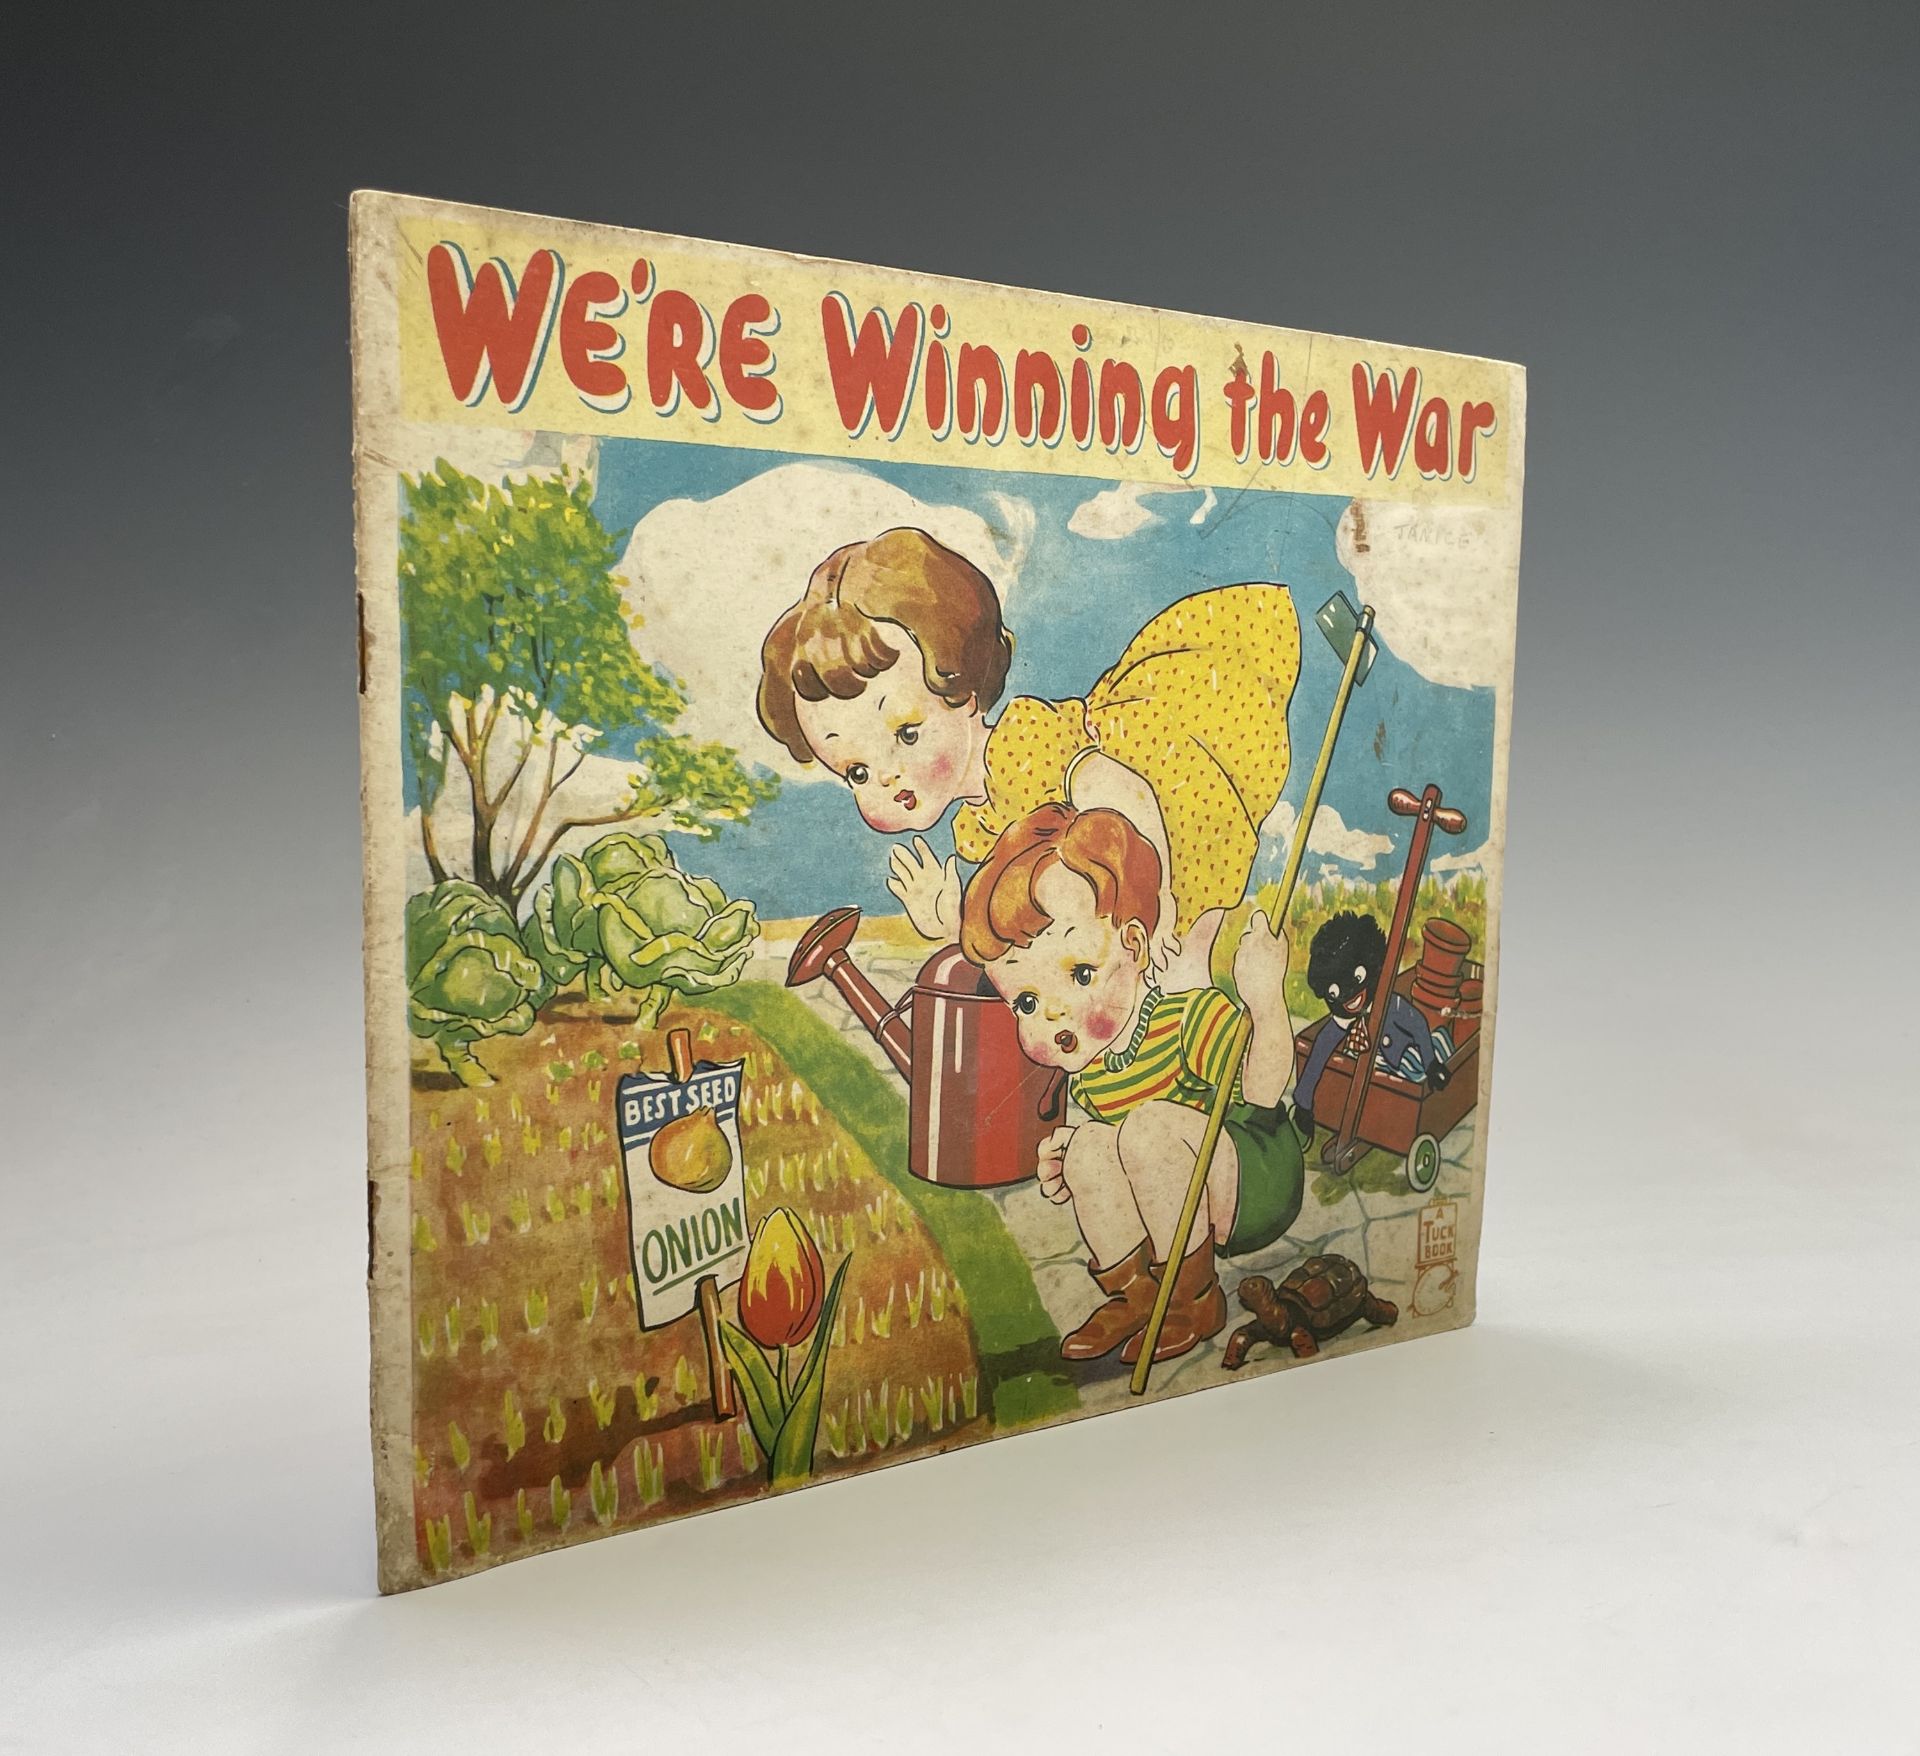 WORLD WAR II RAF PROPAGANDA. Guidance for Gusts. Being a few windy whimsies captured from the - Image 3 of 5